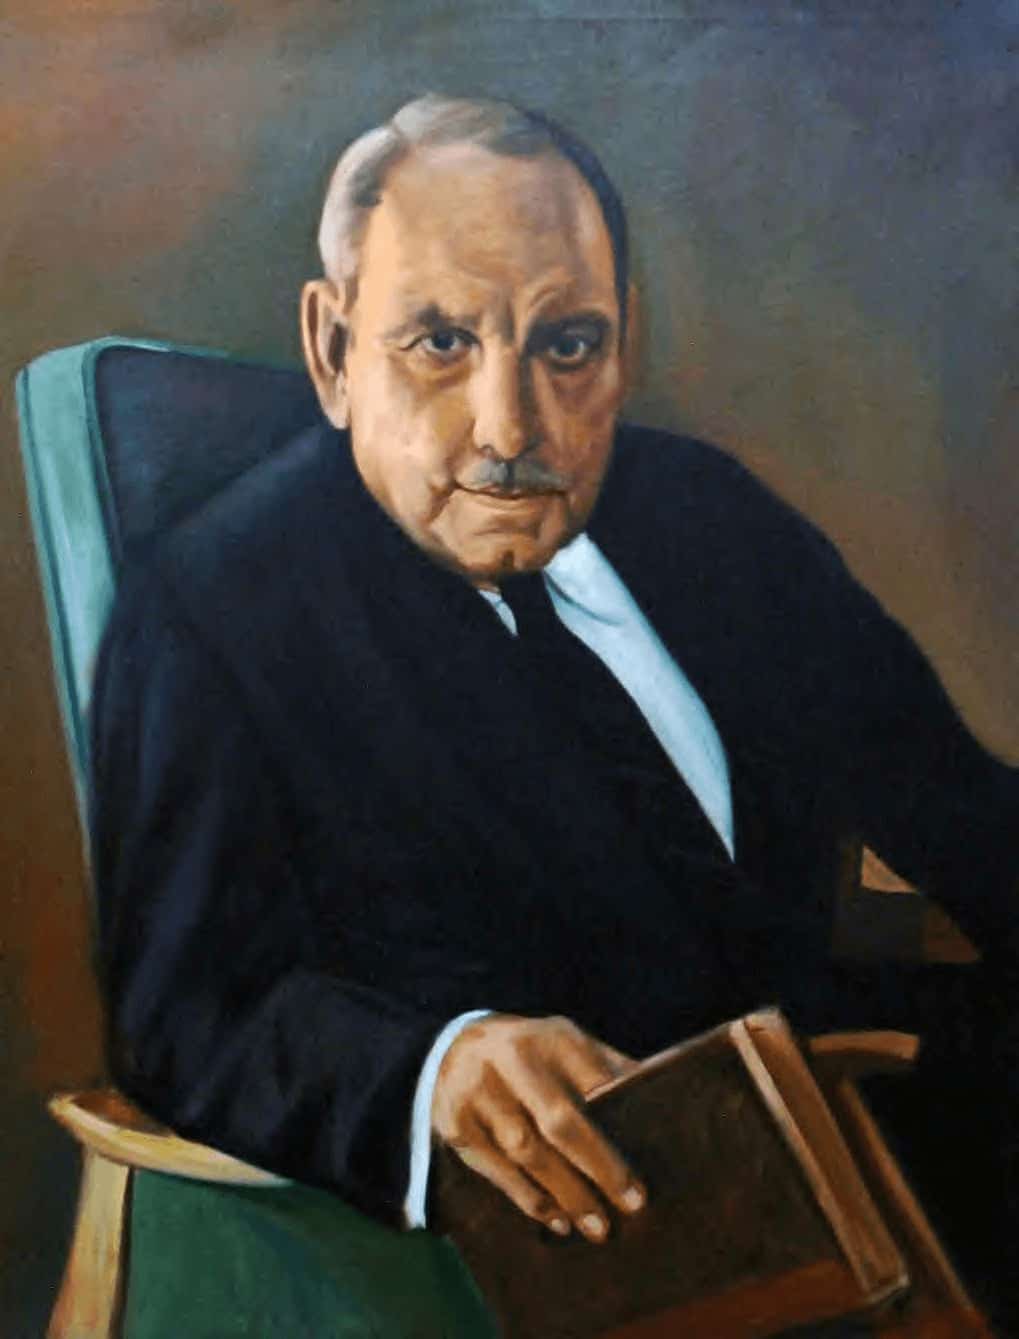 Painting of the Honorable Luis Muñoz Marín, former Secretary of State of Puerto Rico | 	Estrella Díaz | Wikimedia Commons